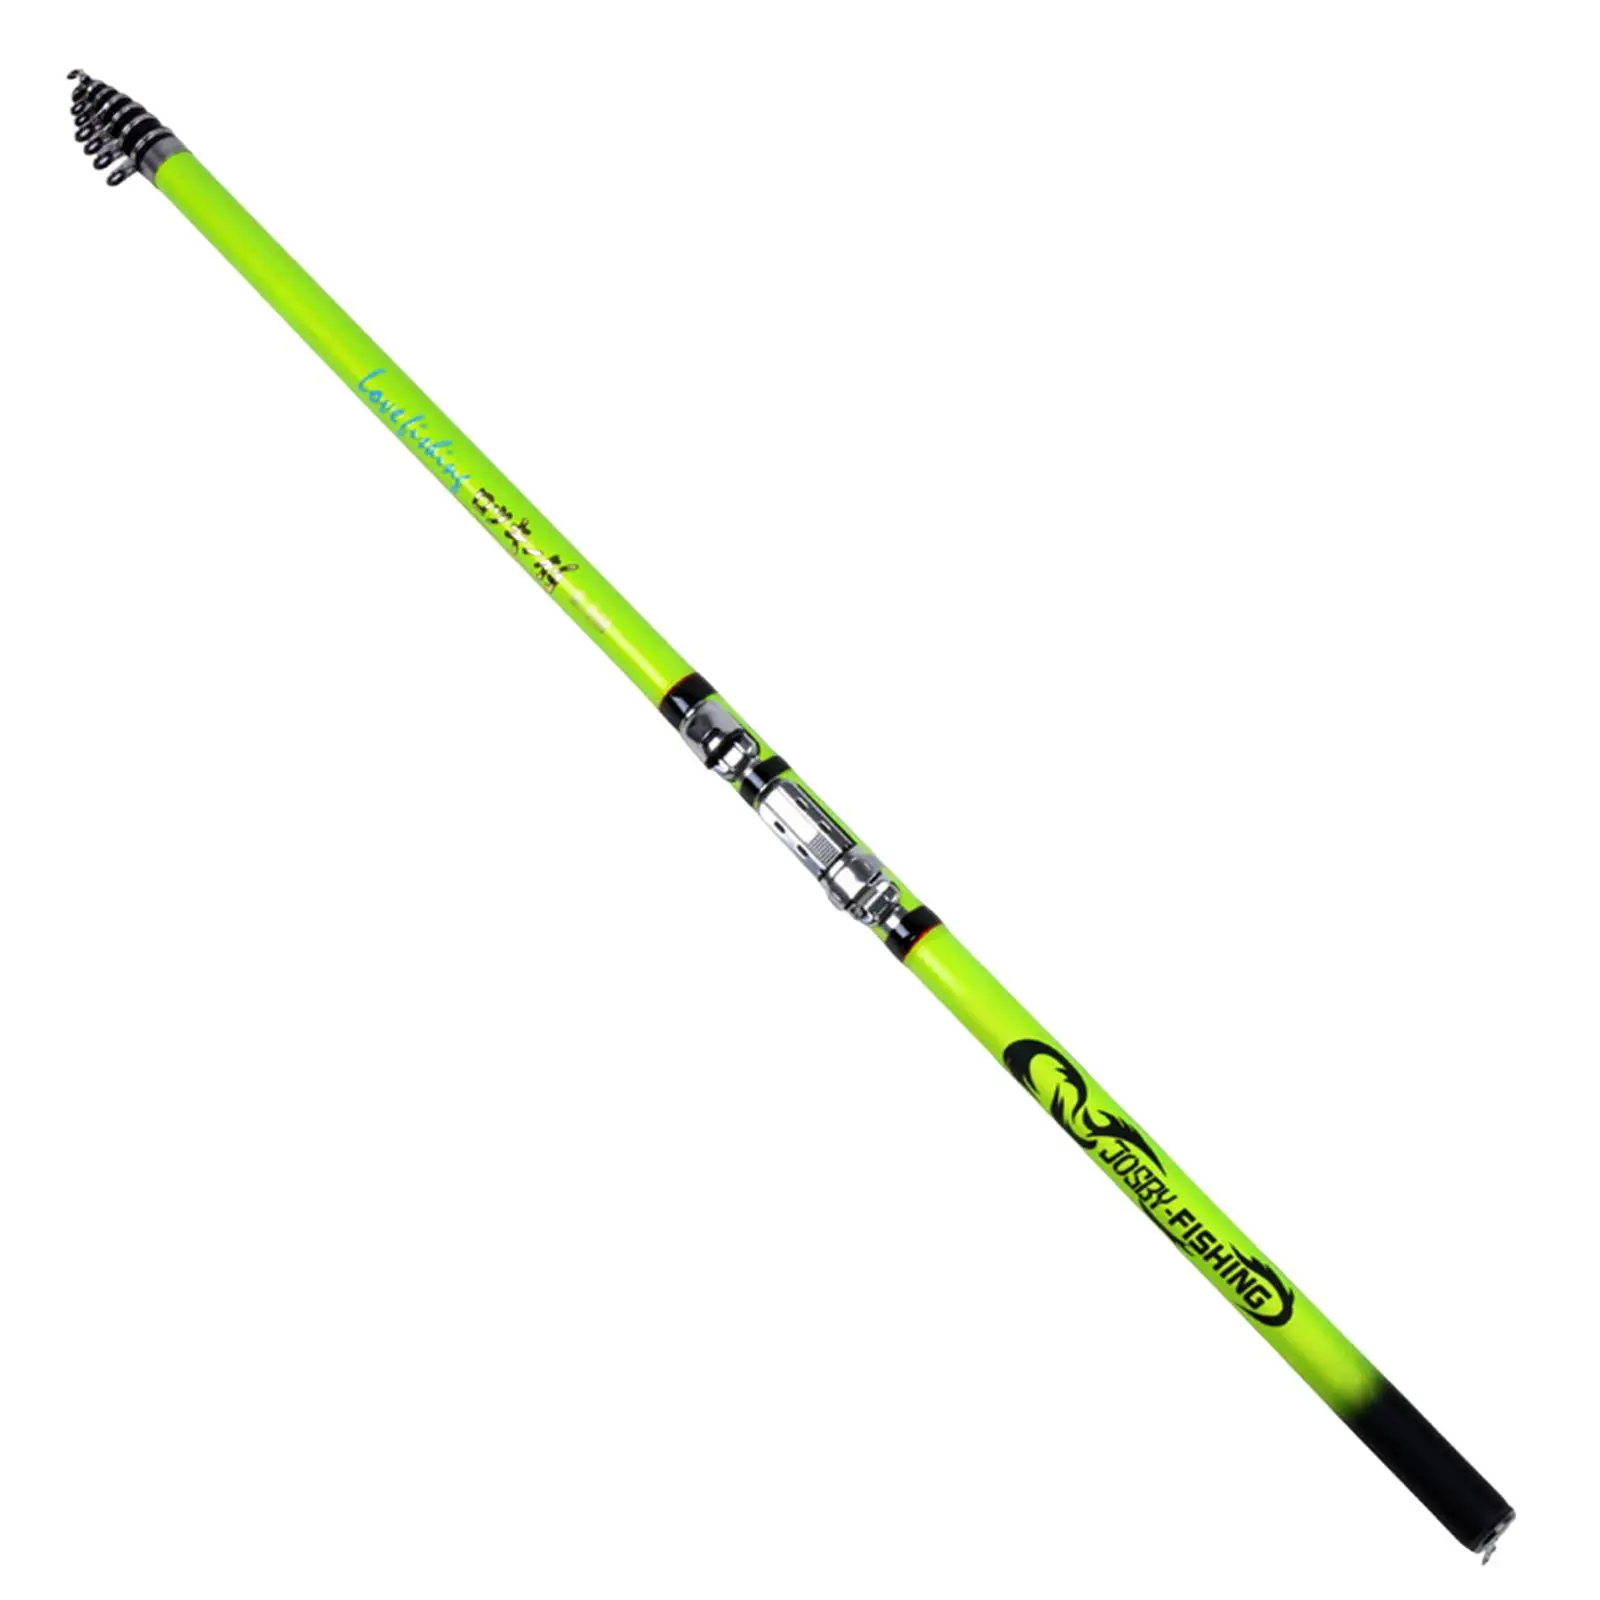 Telescopic Fishing Rod Collapsible Rod for Fishing on Trips and Vacations